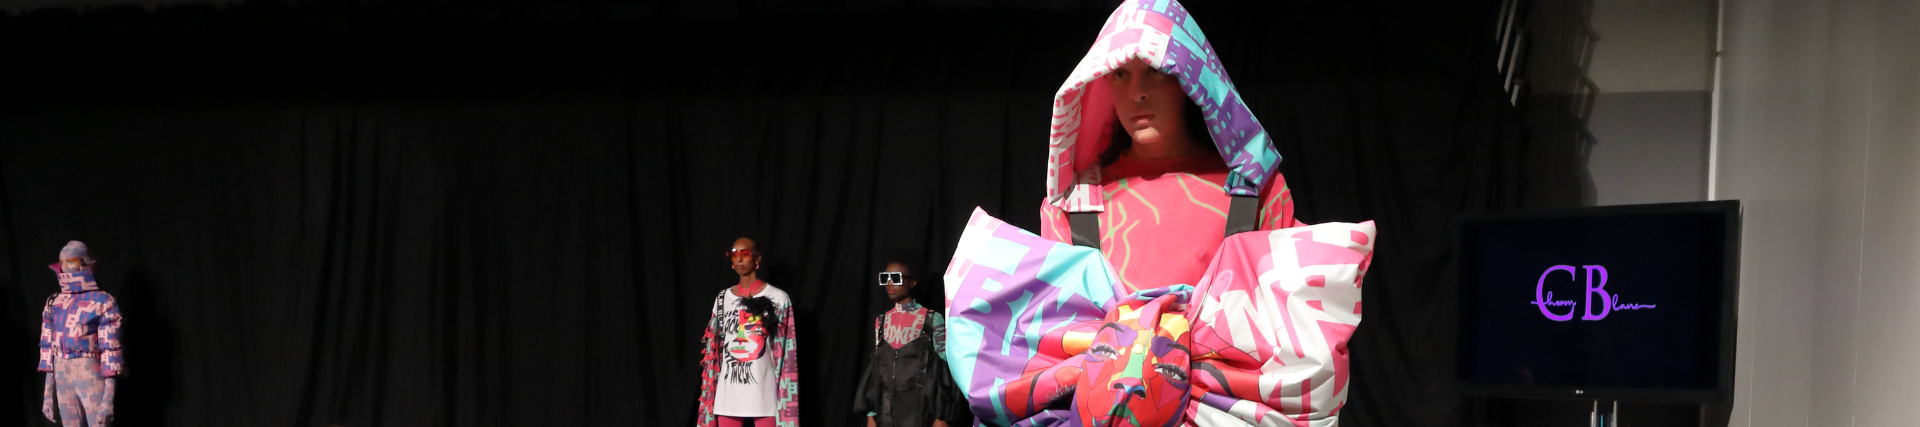 Fashion students at an ARTSFEST fashion show in vibrant outfits.